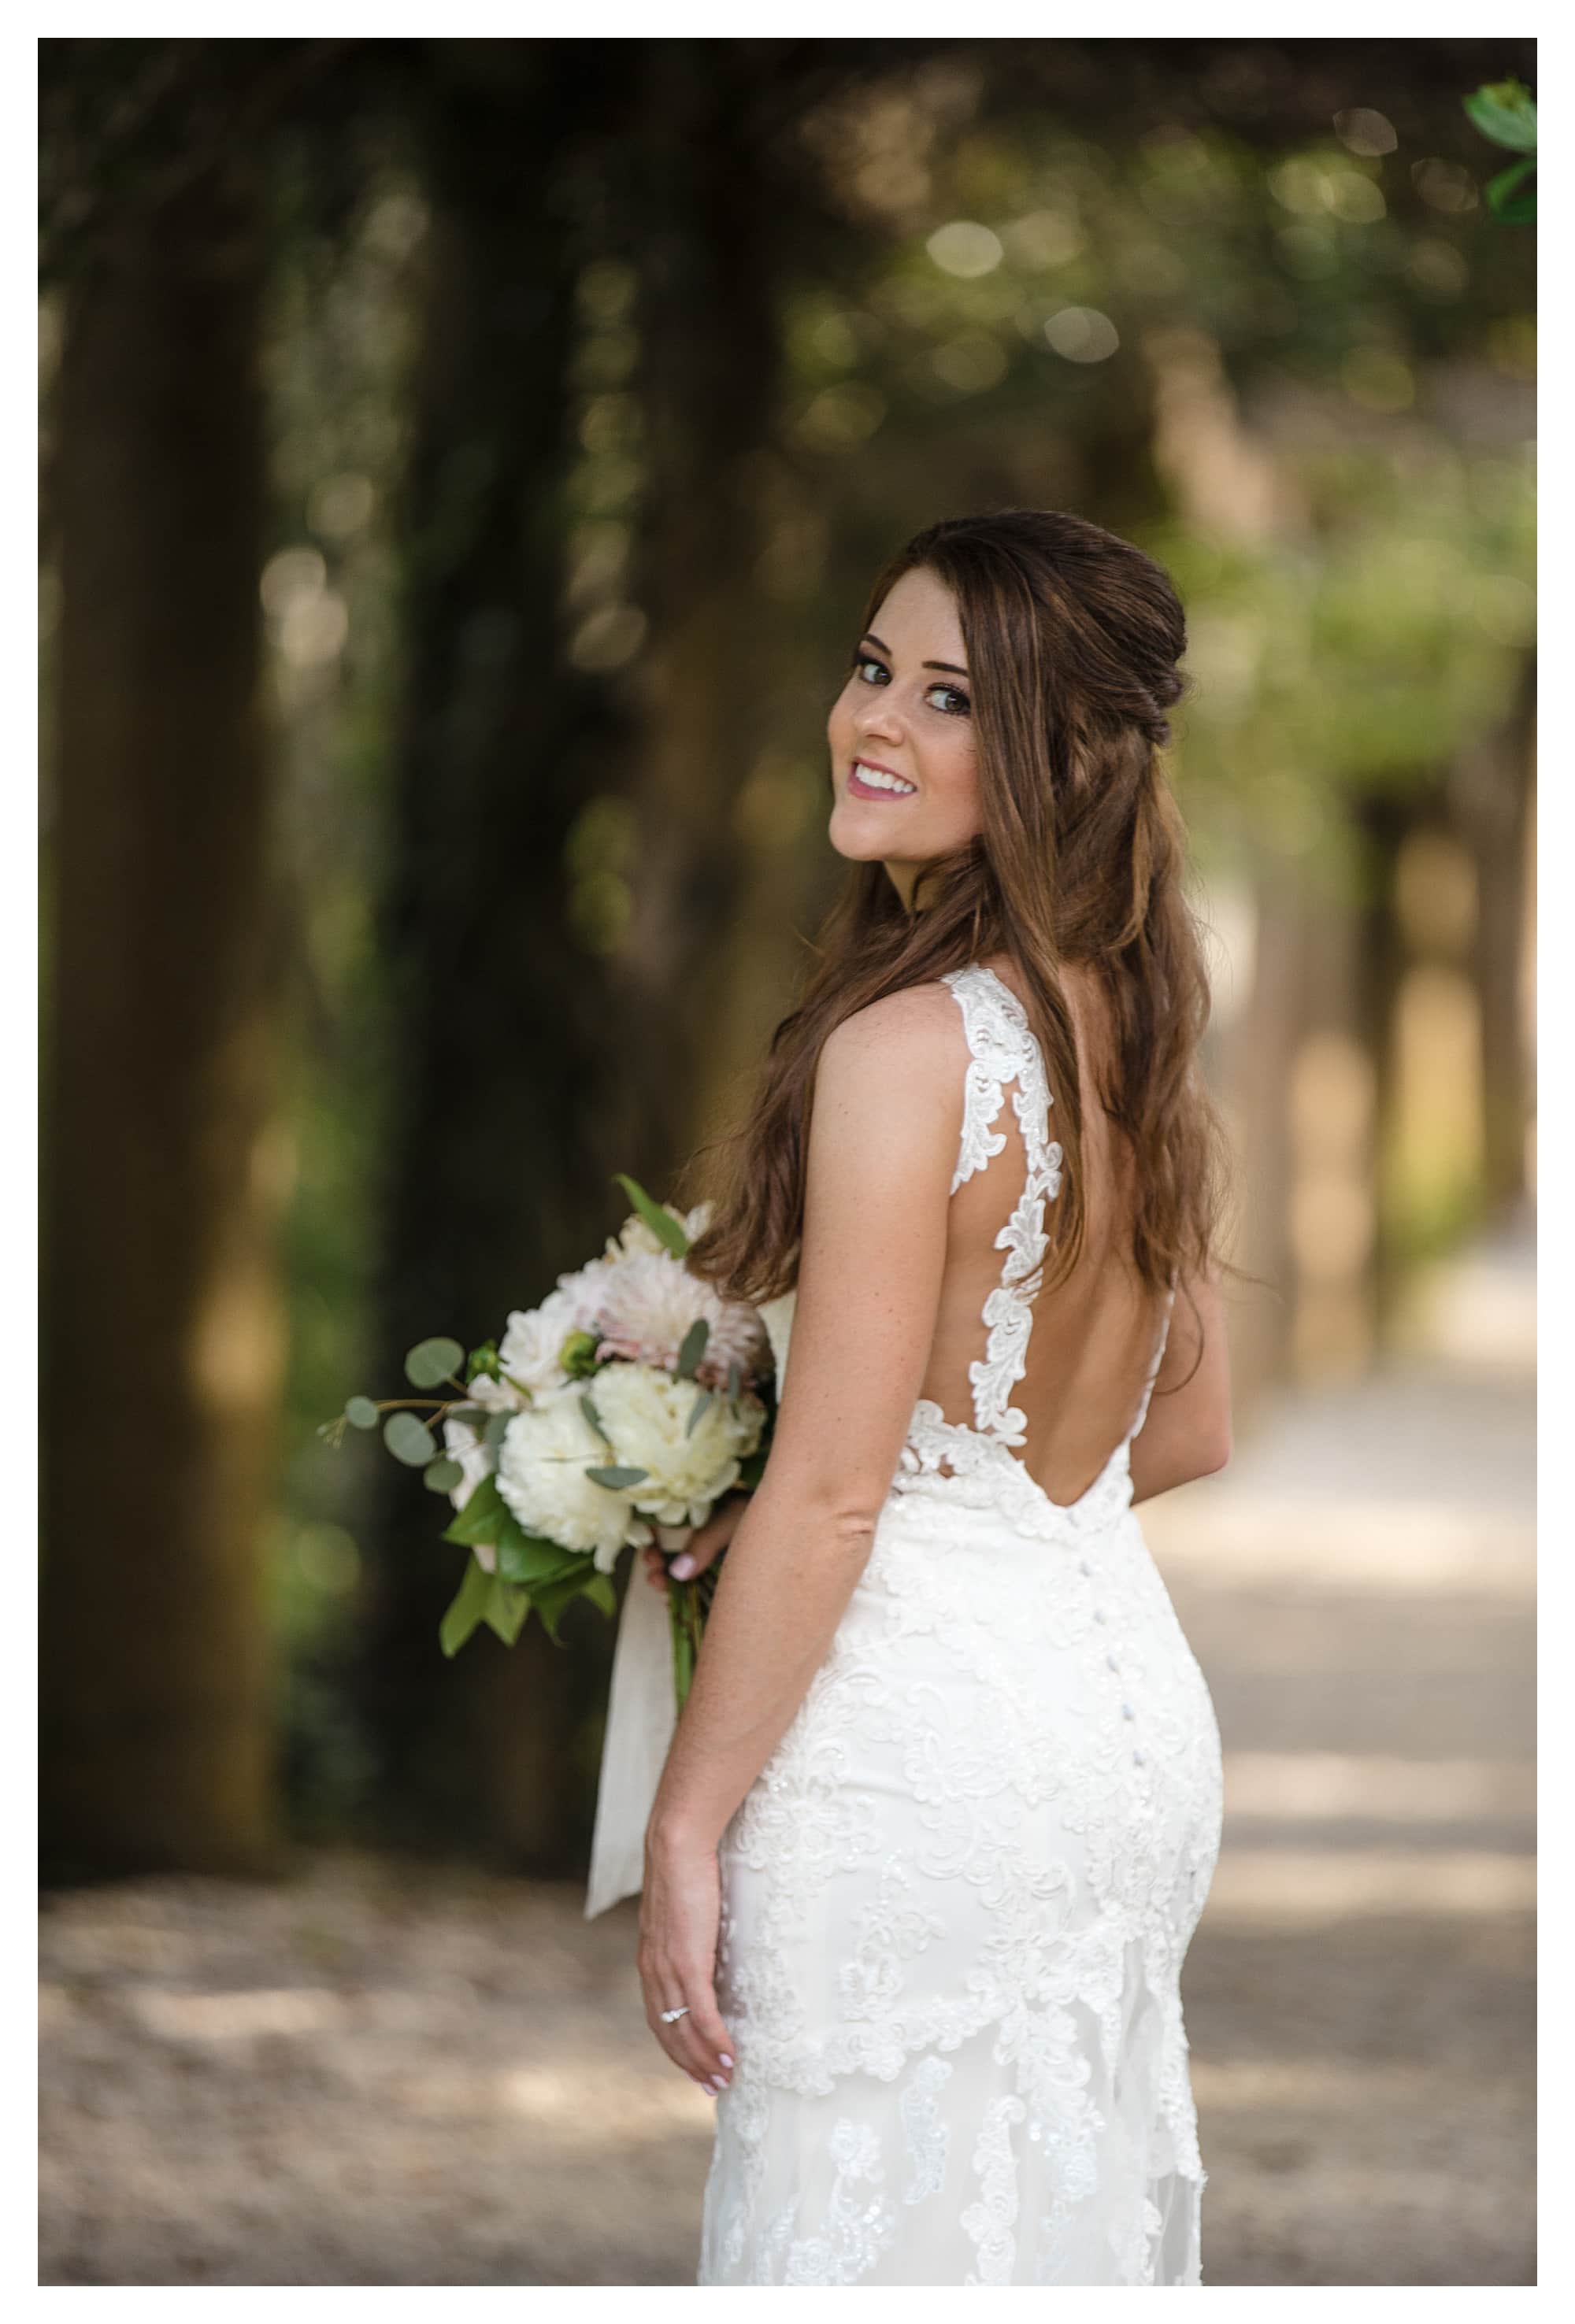 Close up of young bride smiling standing on treed pathway holding cream floral bouquet